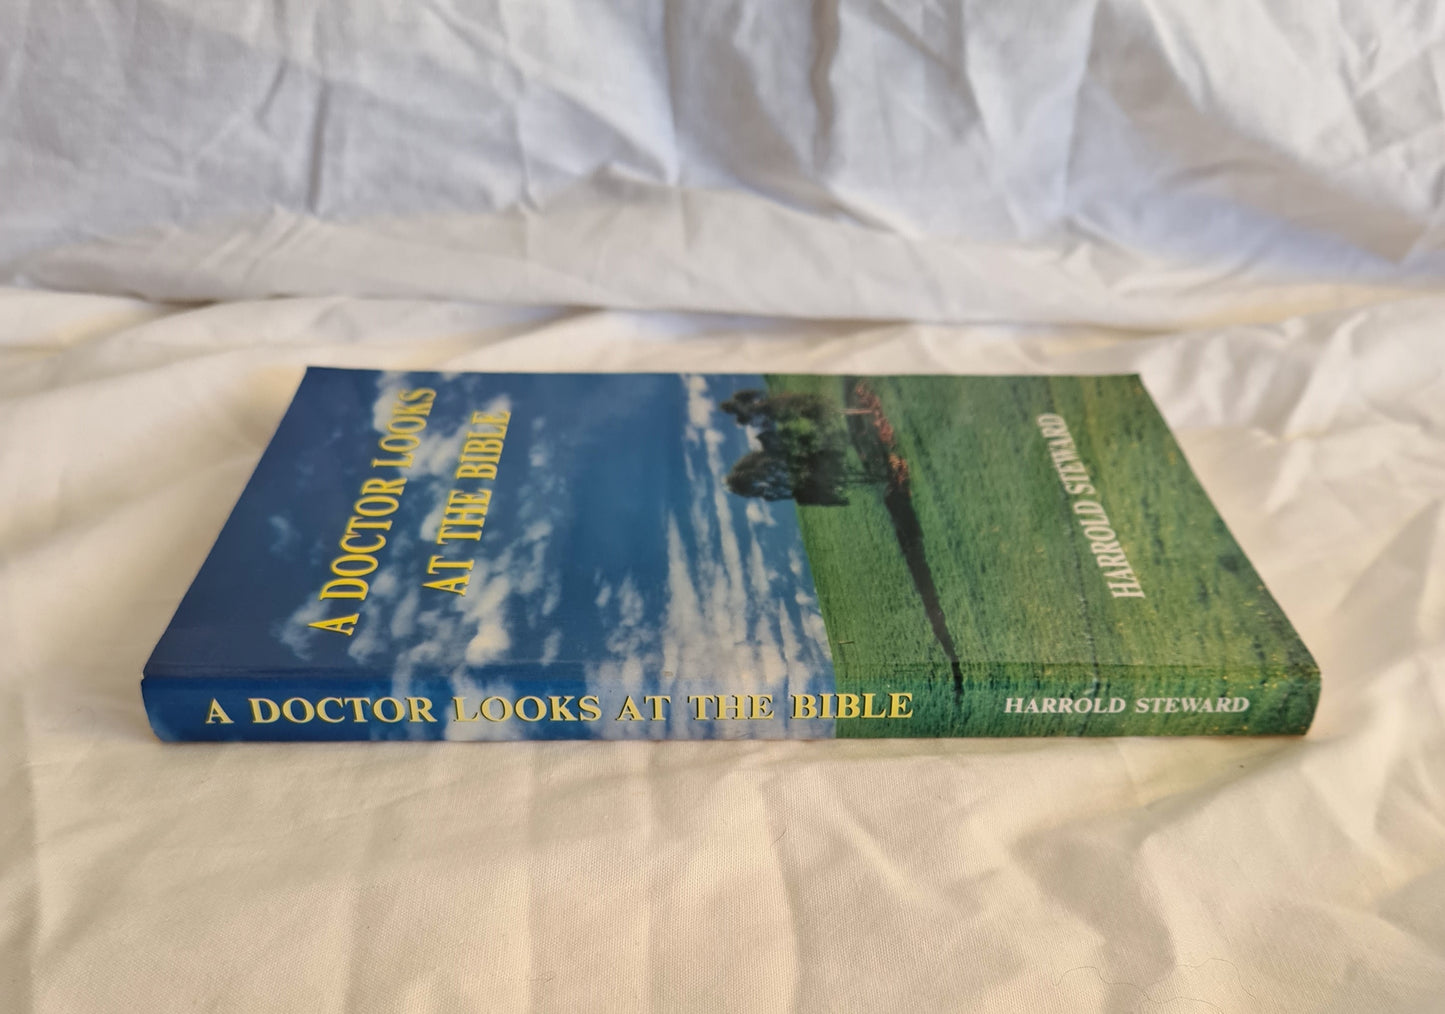 A Doctor Looks At The Bible by Harrold Steward